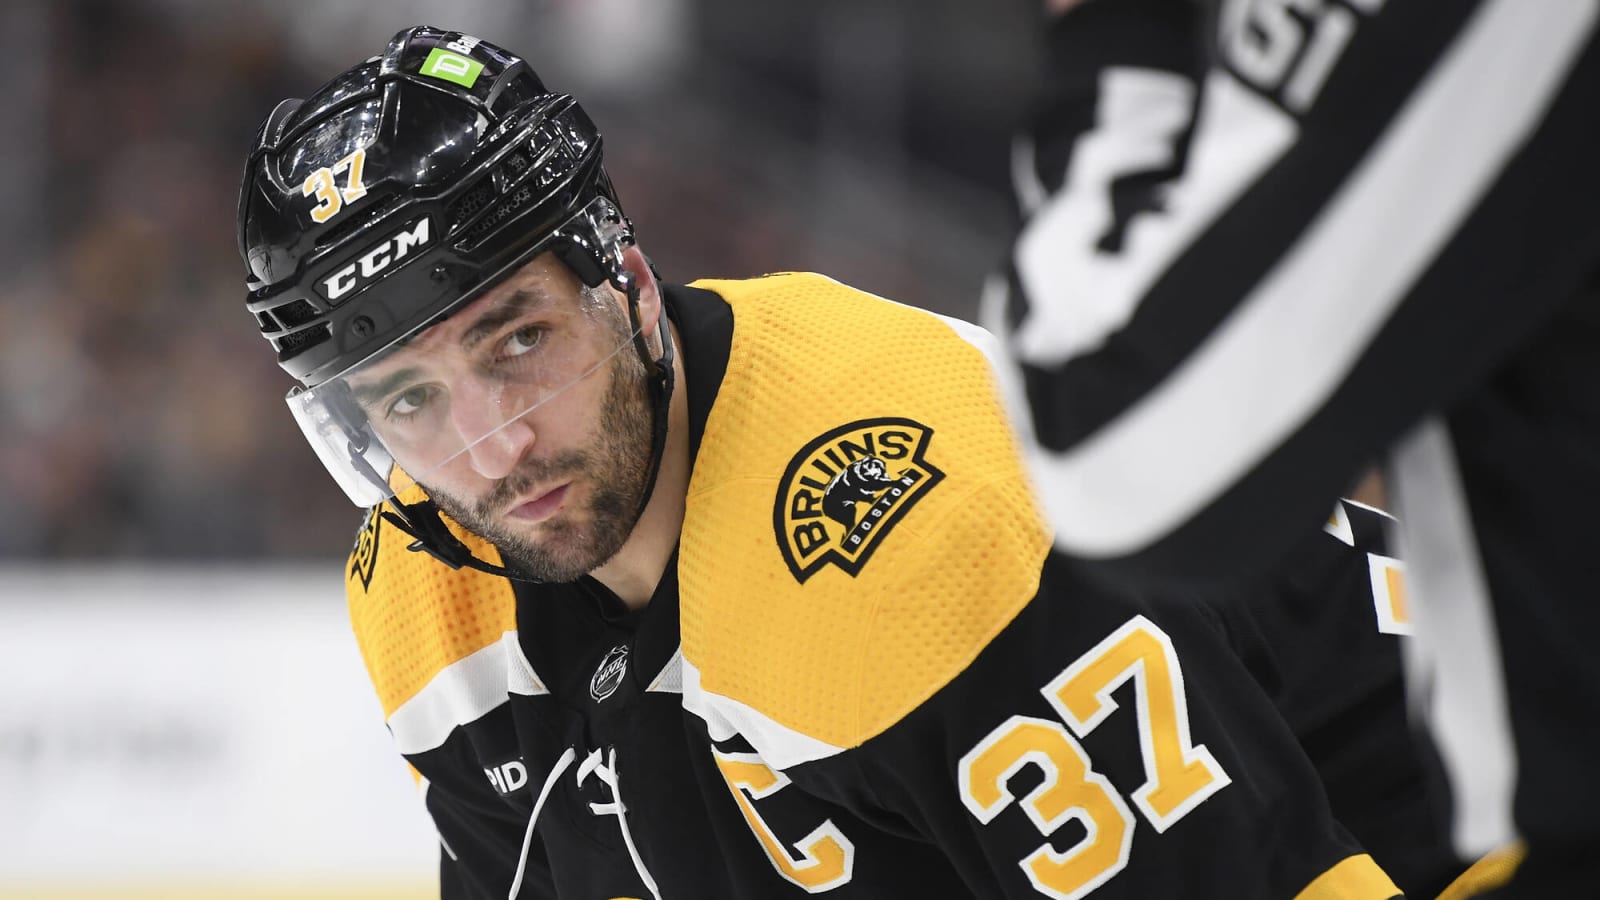  Should Bruins Look Externally To Alter Core?